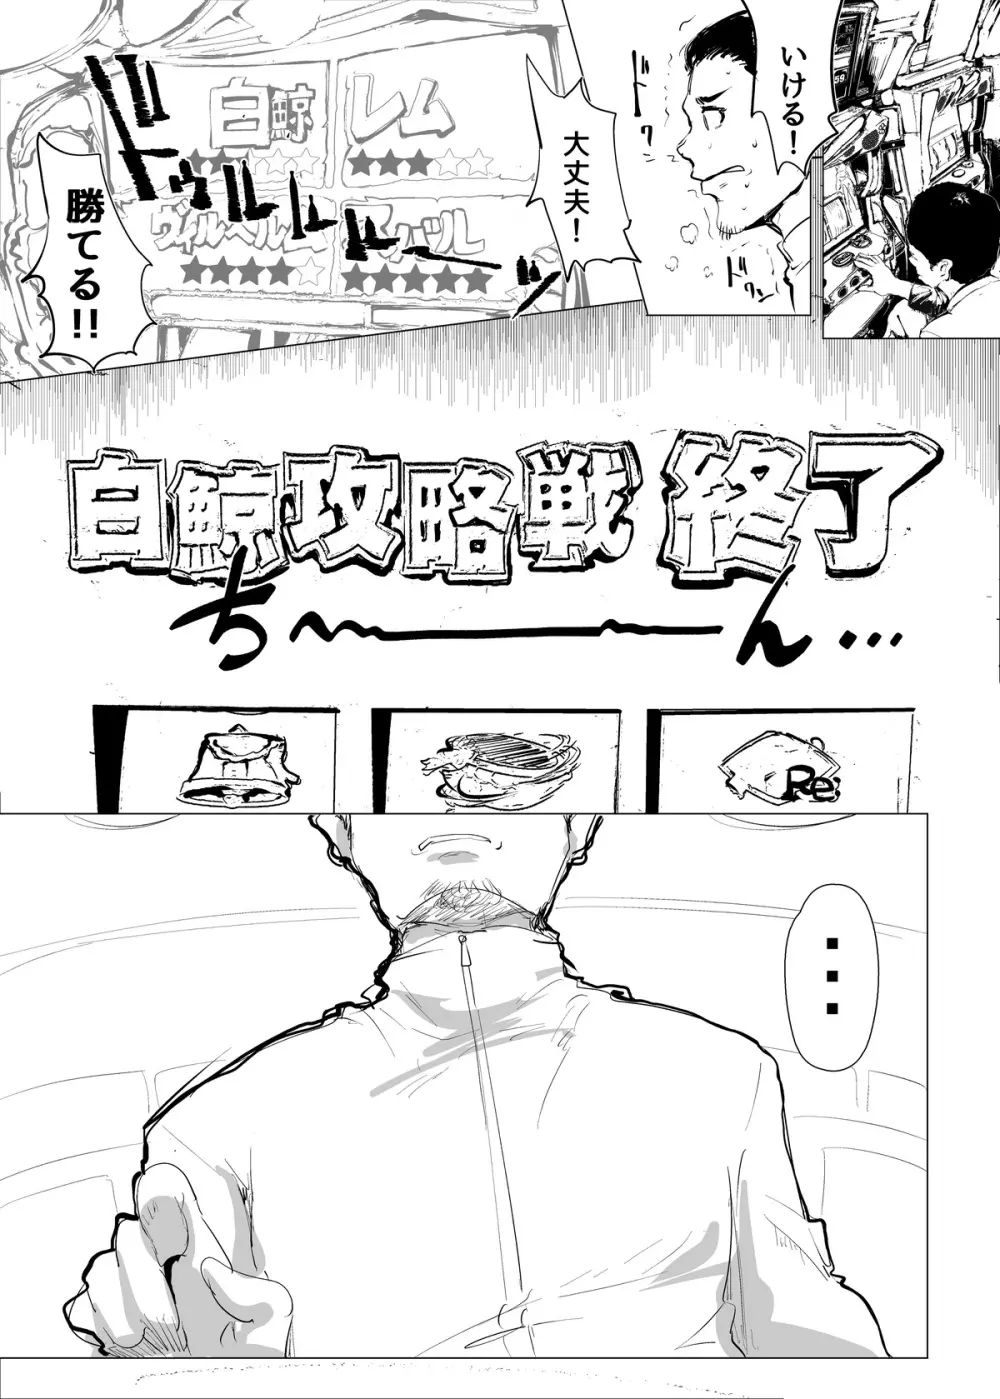 Re:ゼロから始めるパチスロ生活 - page2